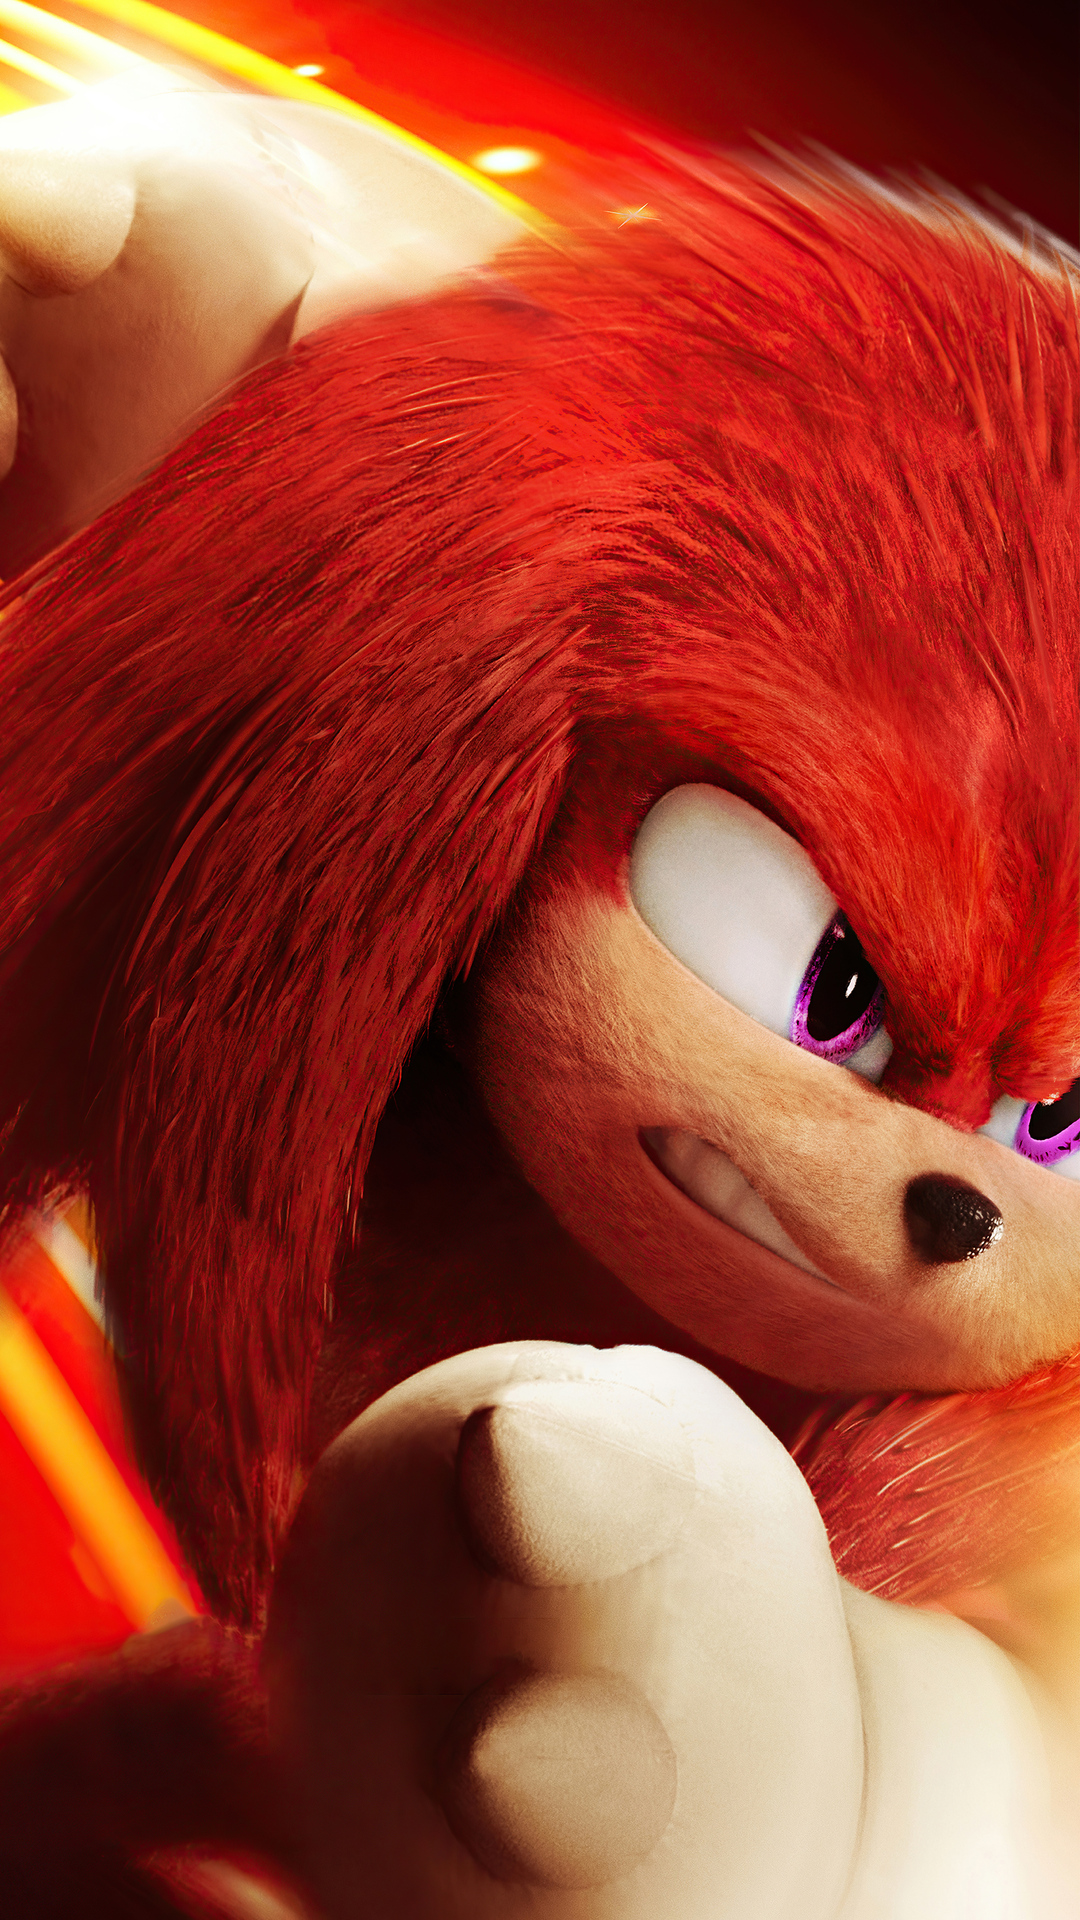 Sonic  Knuckles Sonic the Hedgehog 3 Sonic the Hedgehog 2 Sonic 3  Knuckles  Sonic 3D others sonic The Hedgehog computer Wallpaper video Game png   PNGWing